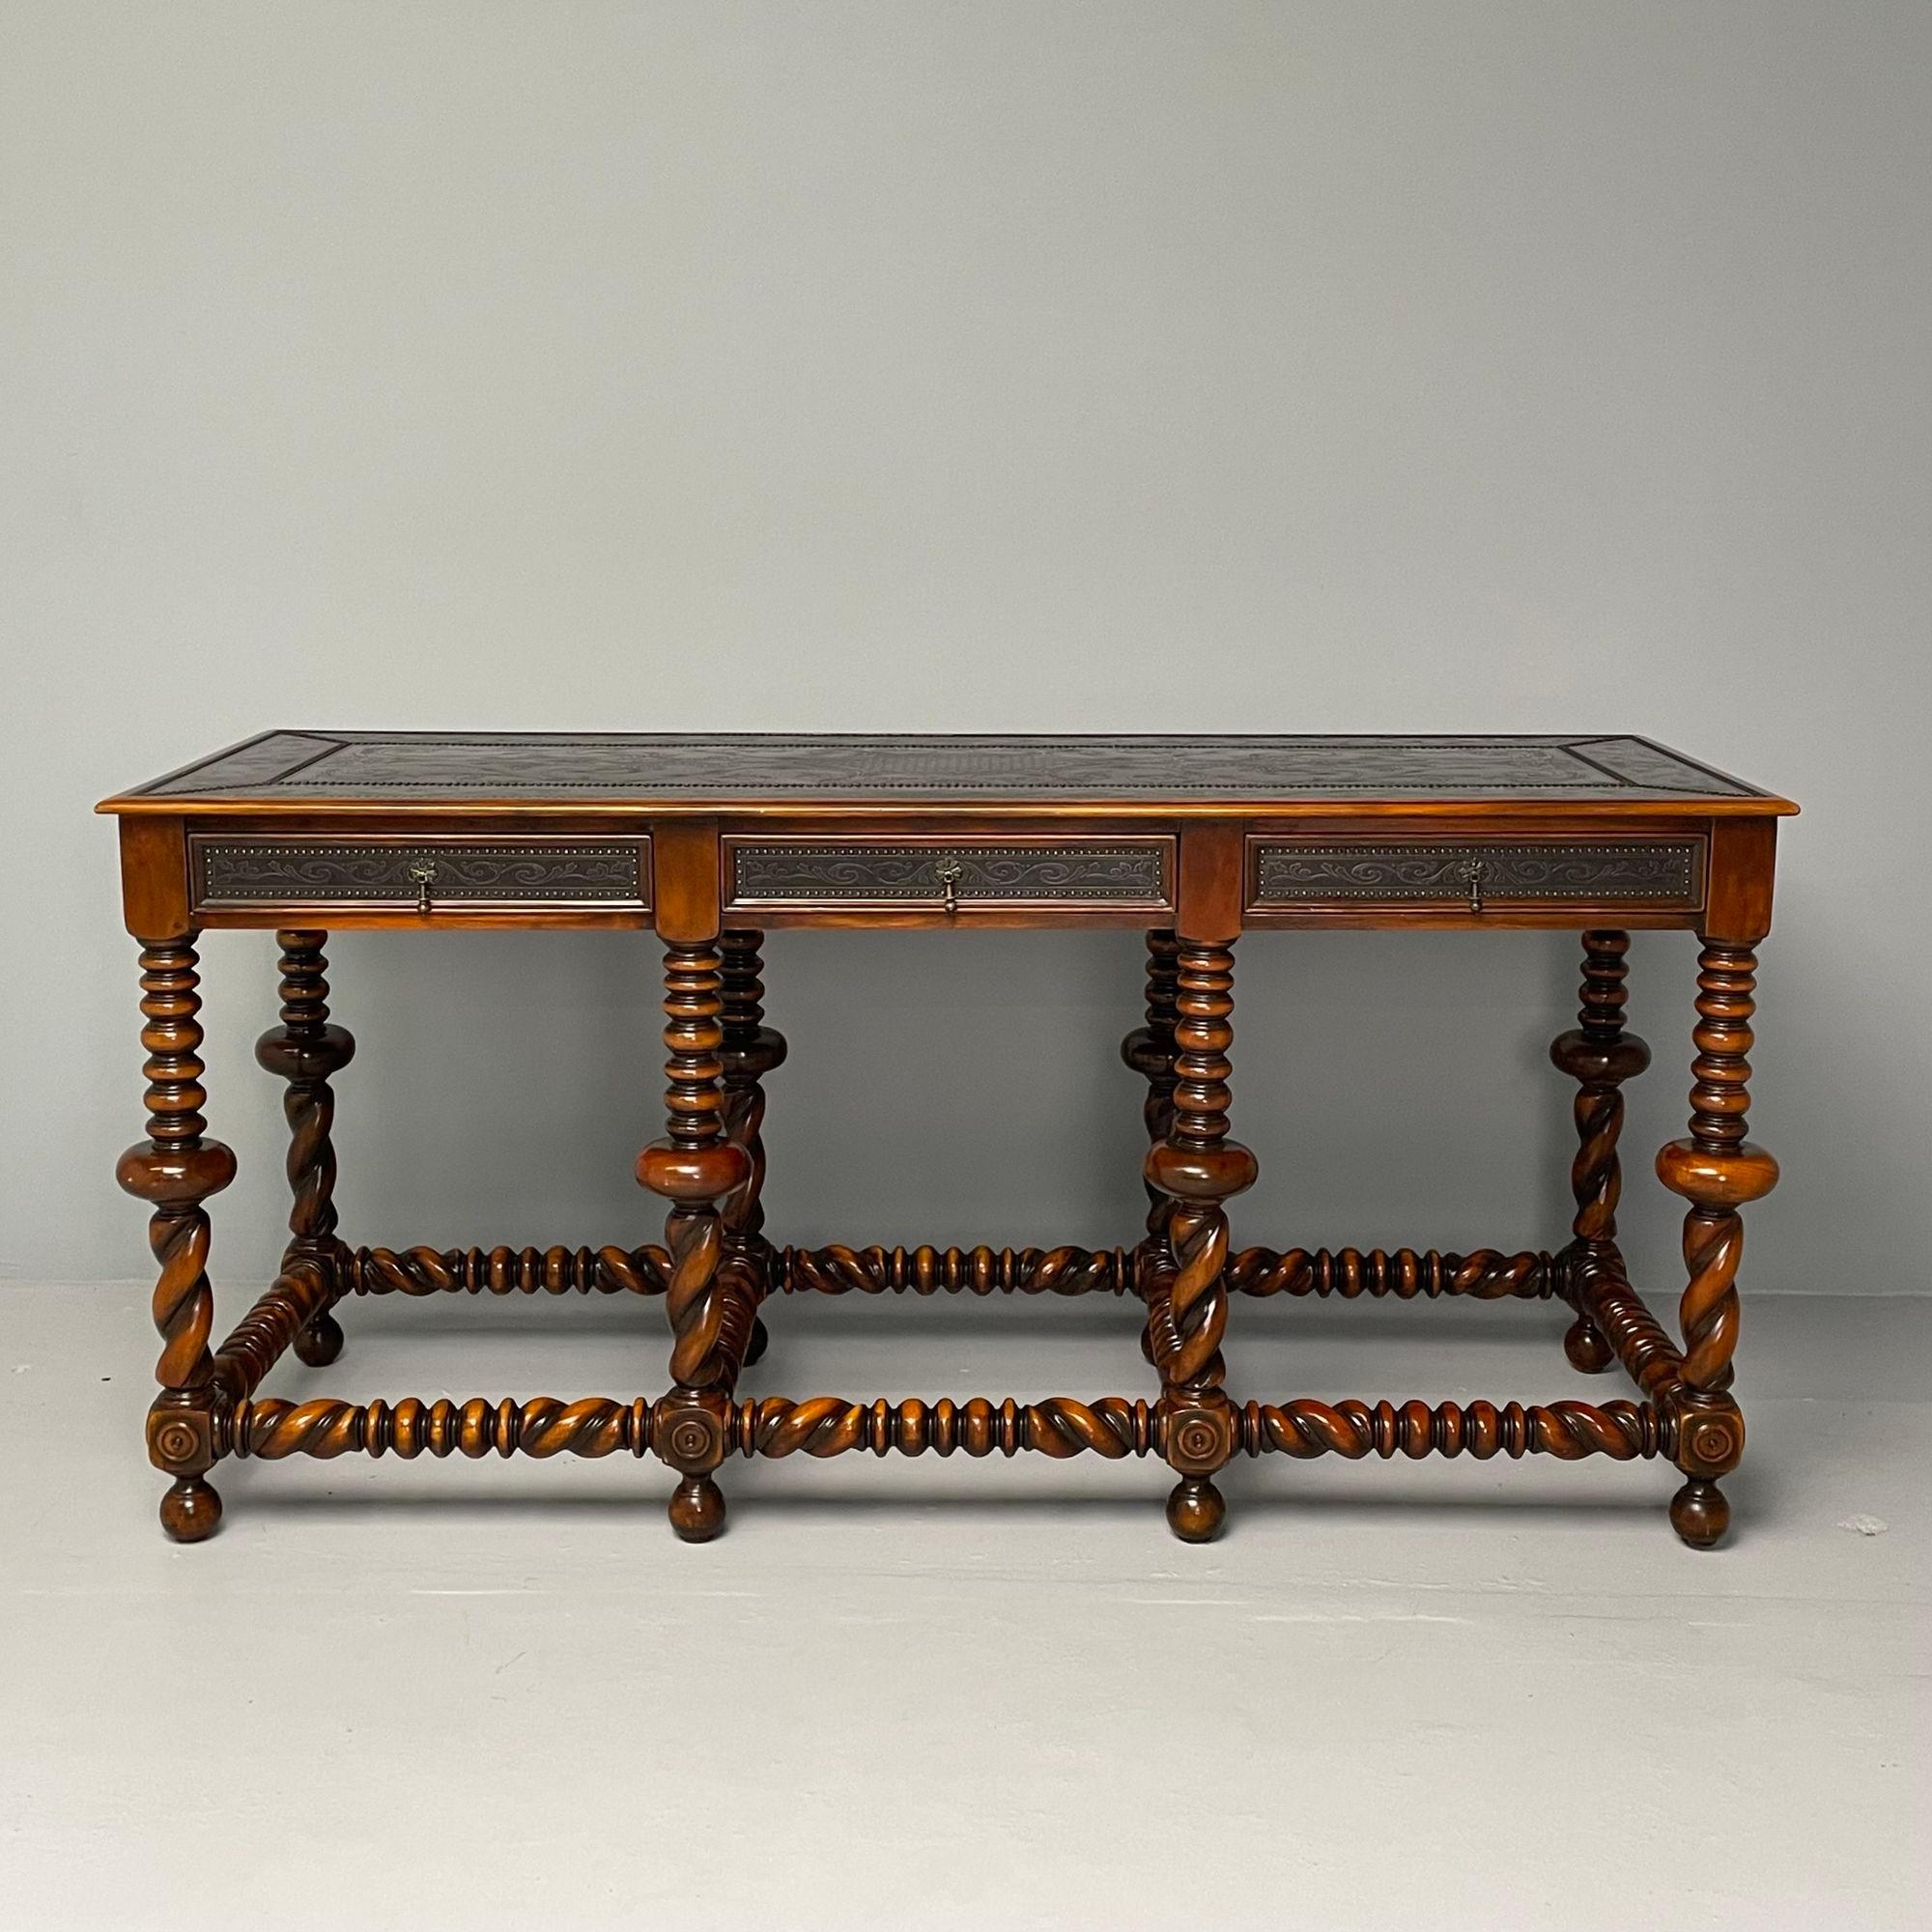 Baroque, Portuguese Style, Barley Twist Console, Turned Wood, Gray Etched Metal, USA, 2000s

A bold and stunning 20th century Baroque Portuguese-style console table with wonderfully elaborate turned legs with barley twist spandrels. The whole having